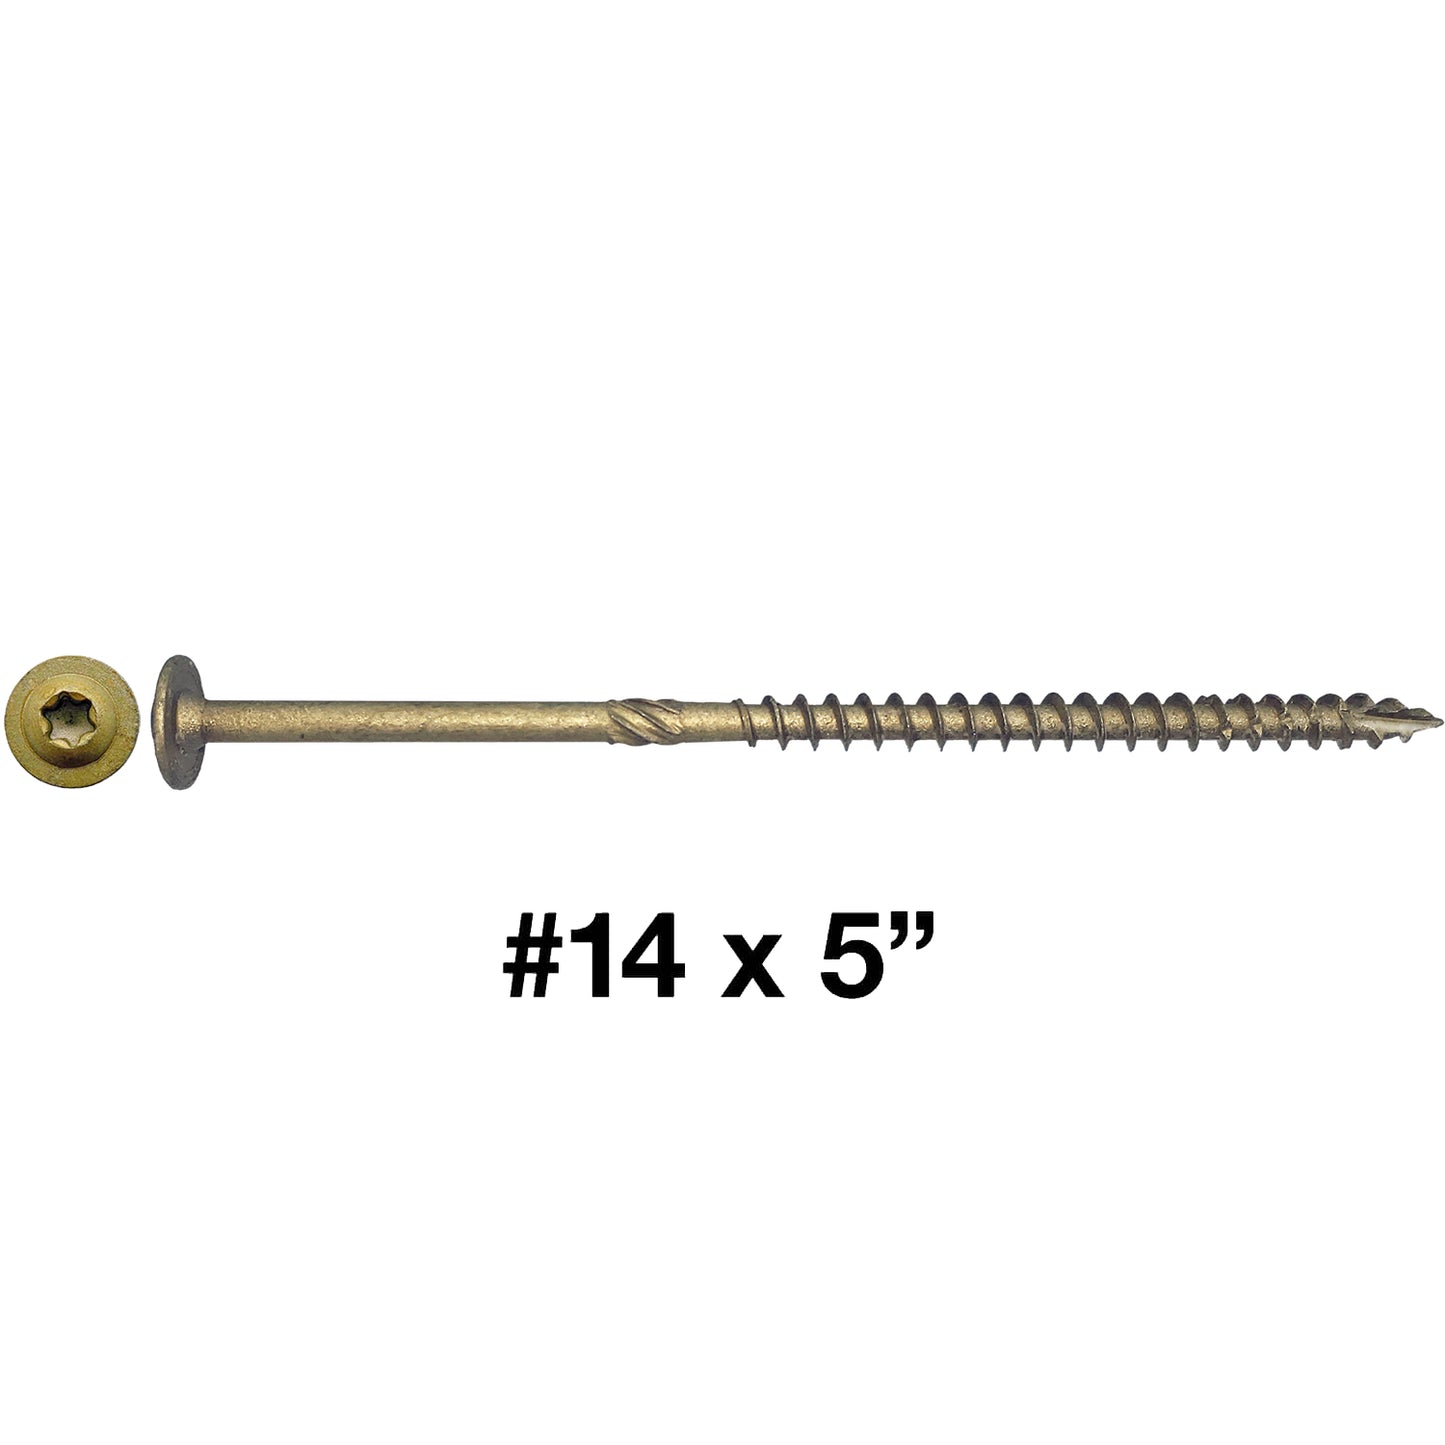 #14 Construction Lag Screws - Exterior Coated Torx/Star Drive Heavy Duty Structural Lag With Modified Truss Washer Head